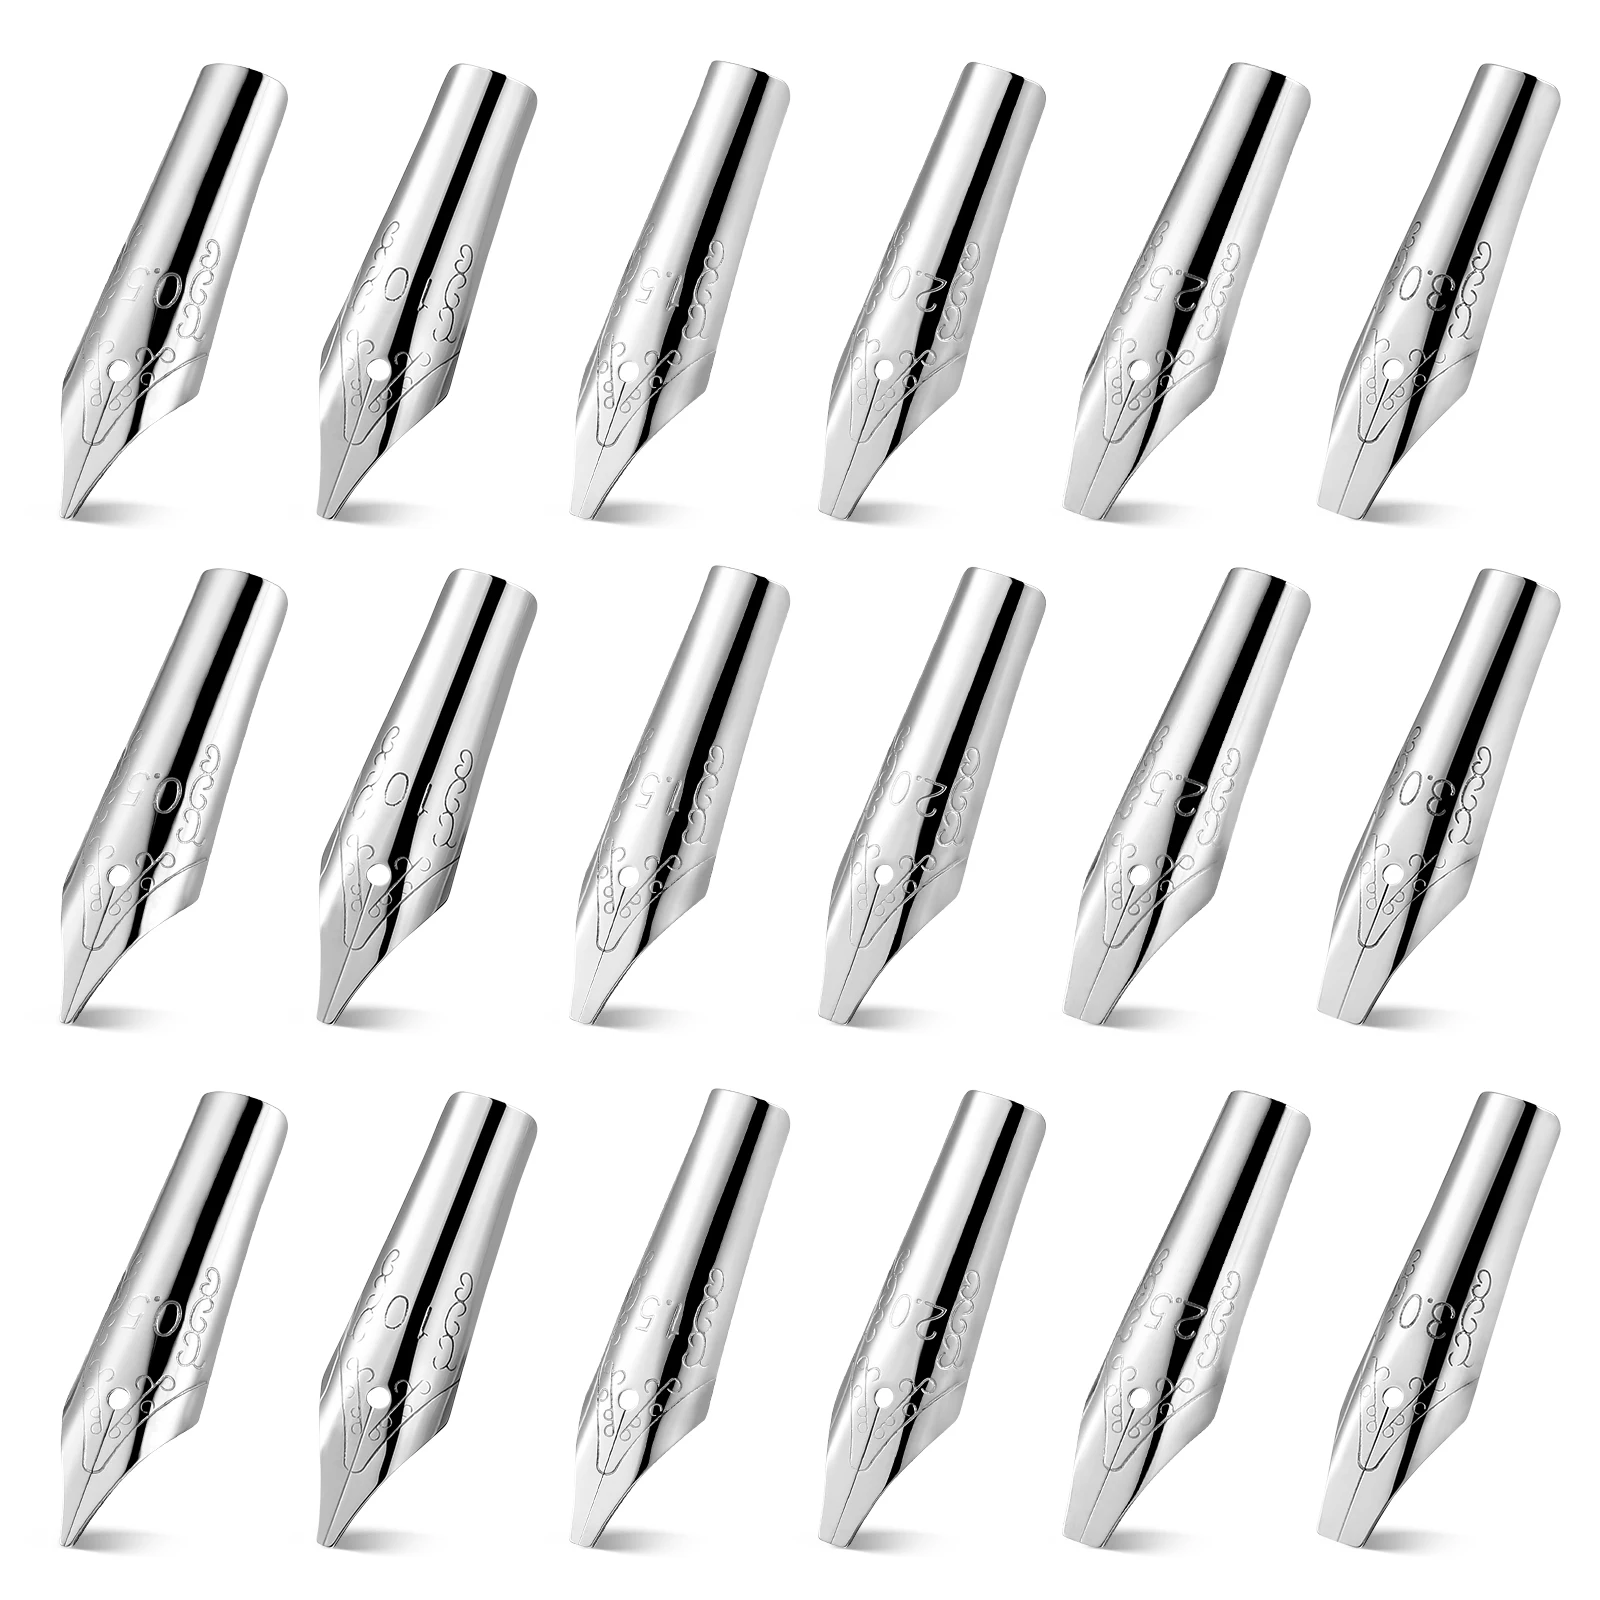 

30pcs Pen Nibs Set Calligraphy Writing Pen Nibs Fountain Pen Replacement Nibs Stainless Steel Writing Dip Ink Pen Nibs